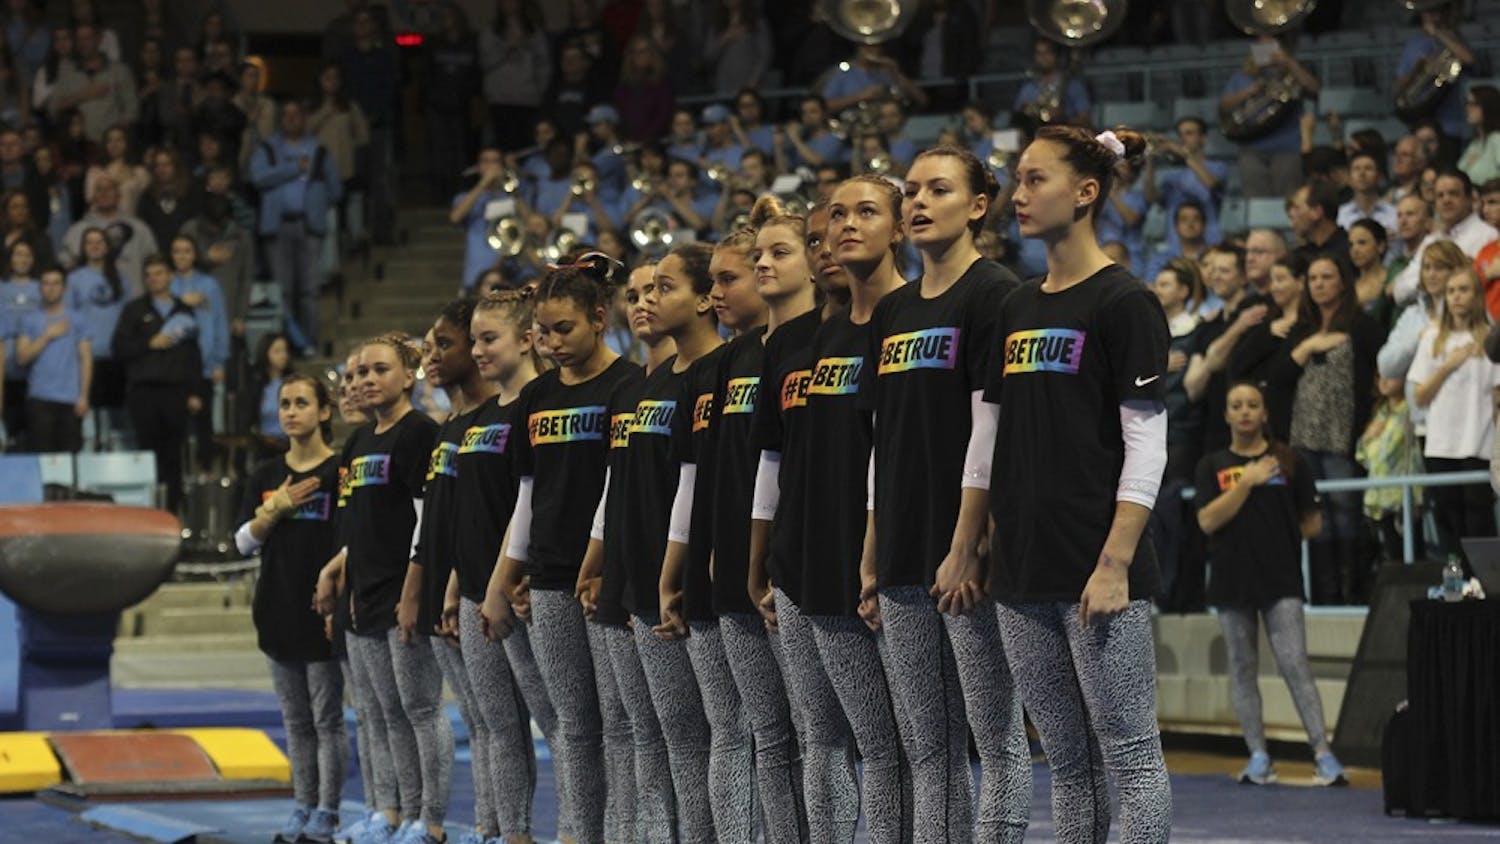 The gymnastics team stands together wearing shirts with the saying “#BeTrue” in honor of the LBGTQ movement before their meet against Florida on Friday.